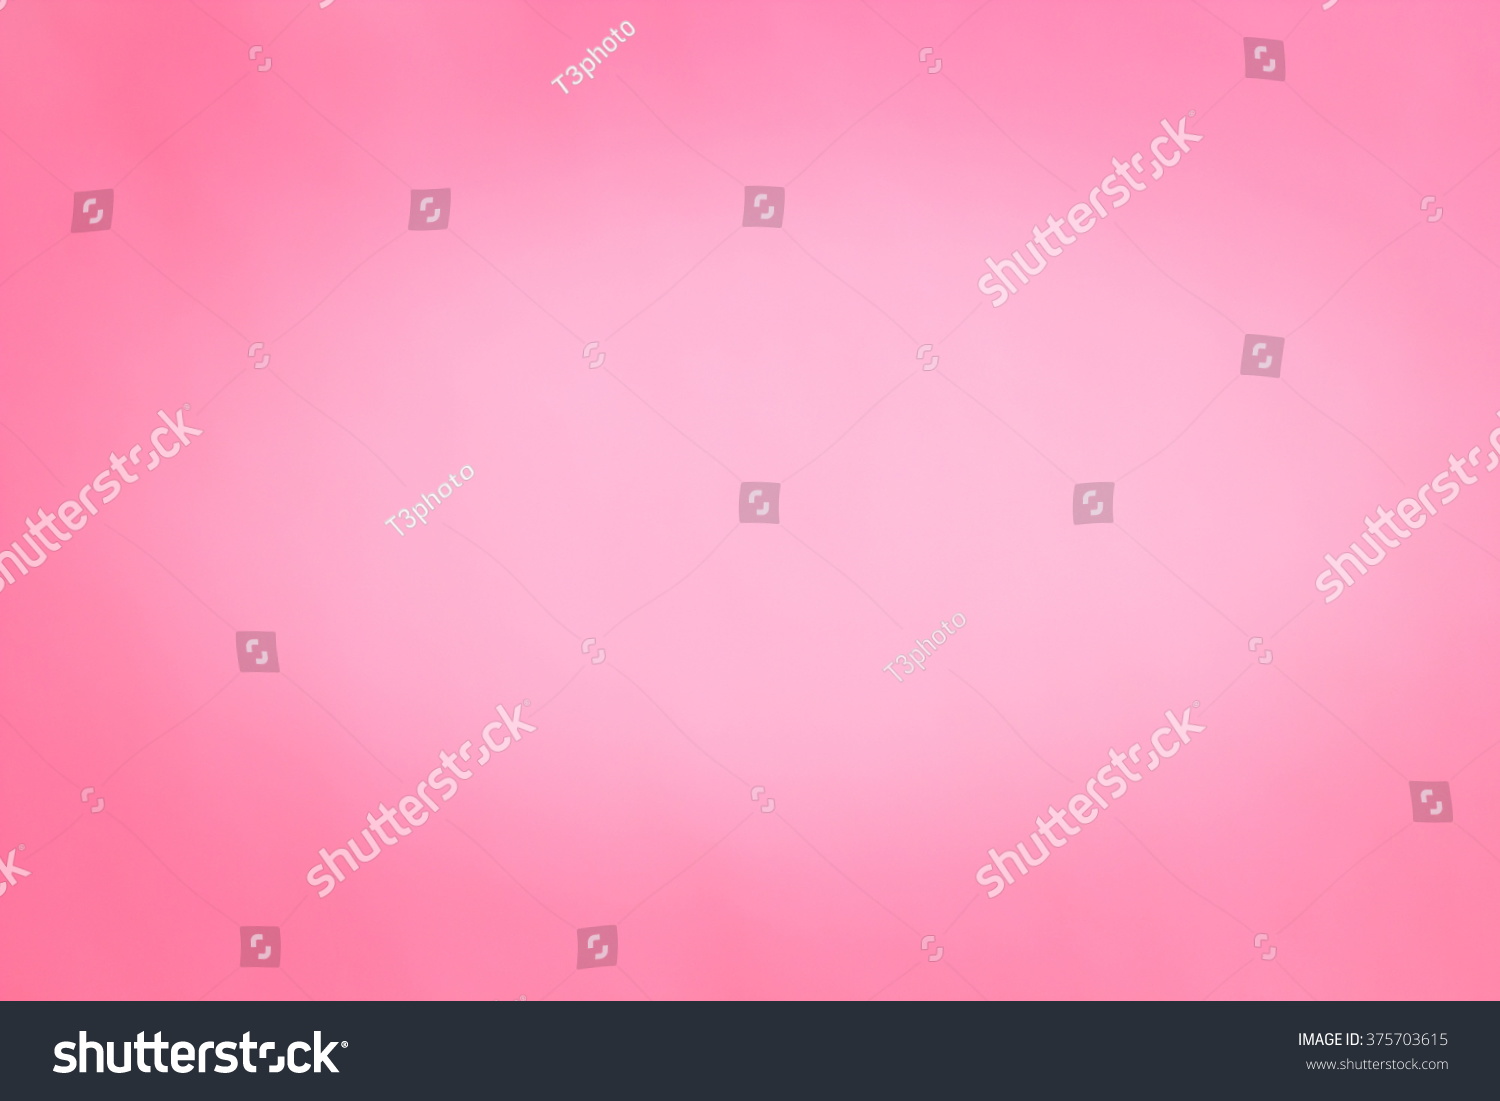 colorful blurred backgrounds / pink background #375703615